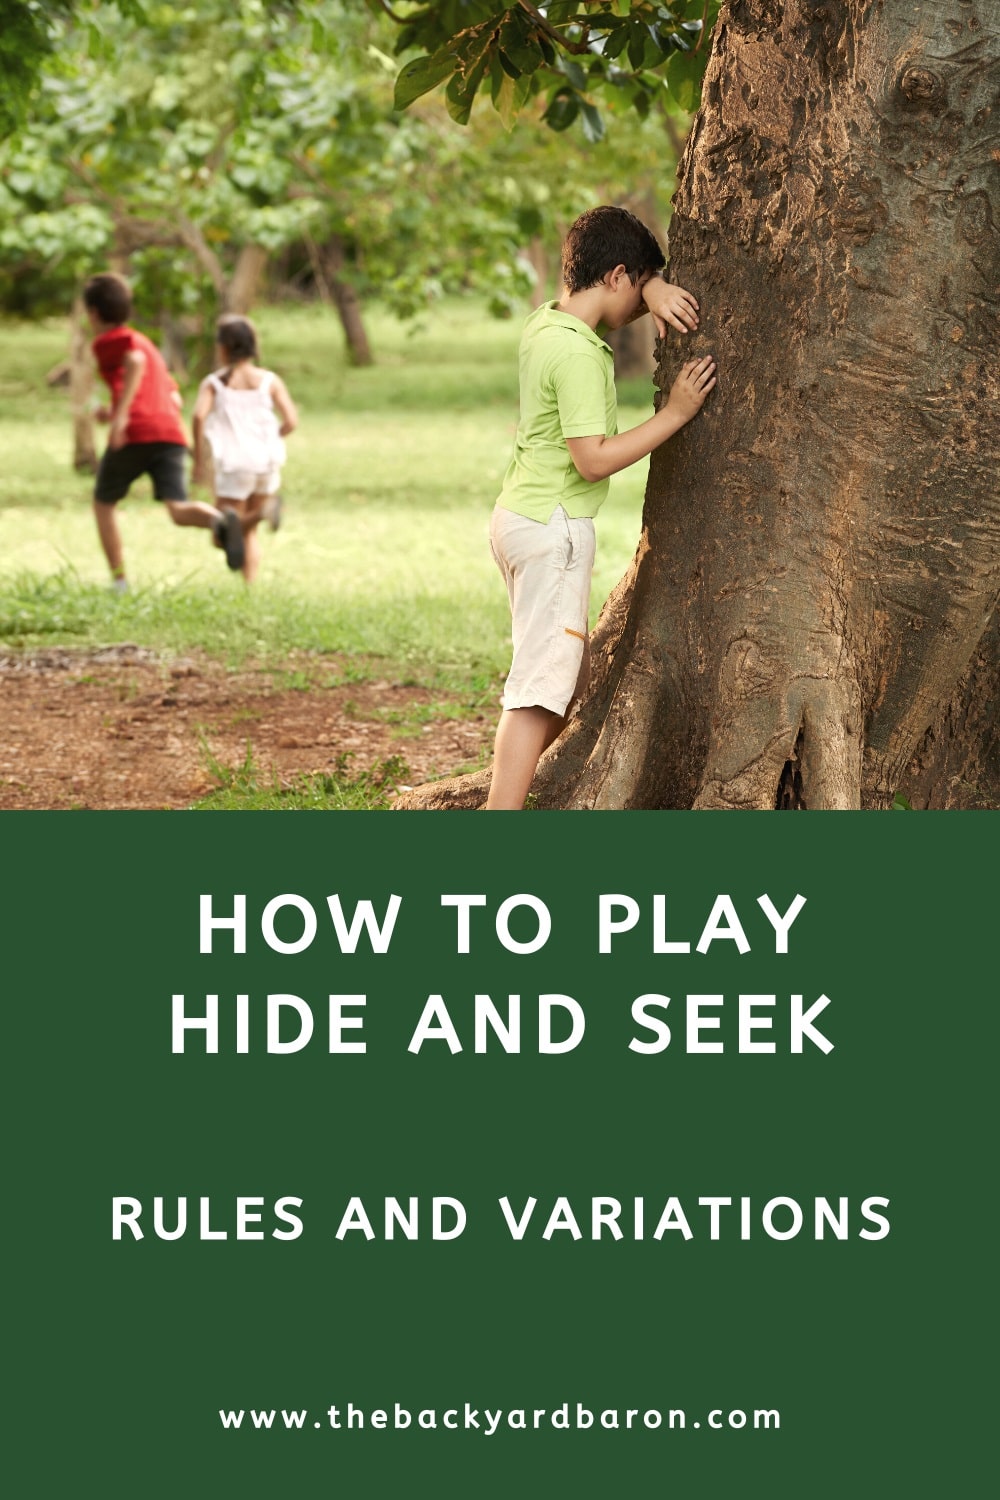 How to play hide and seek (rules and variations)